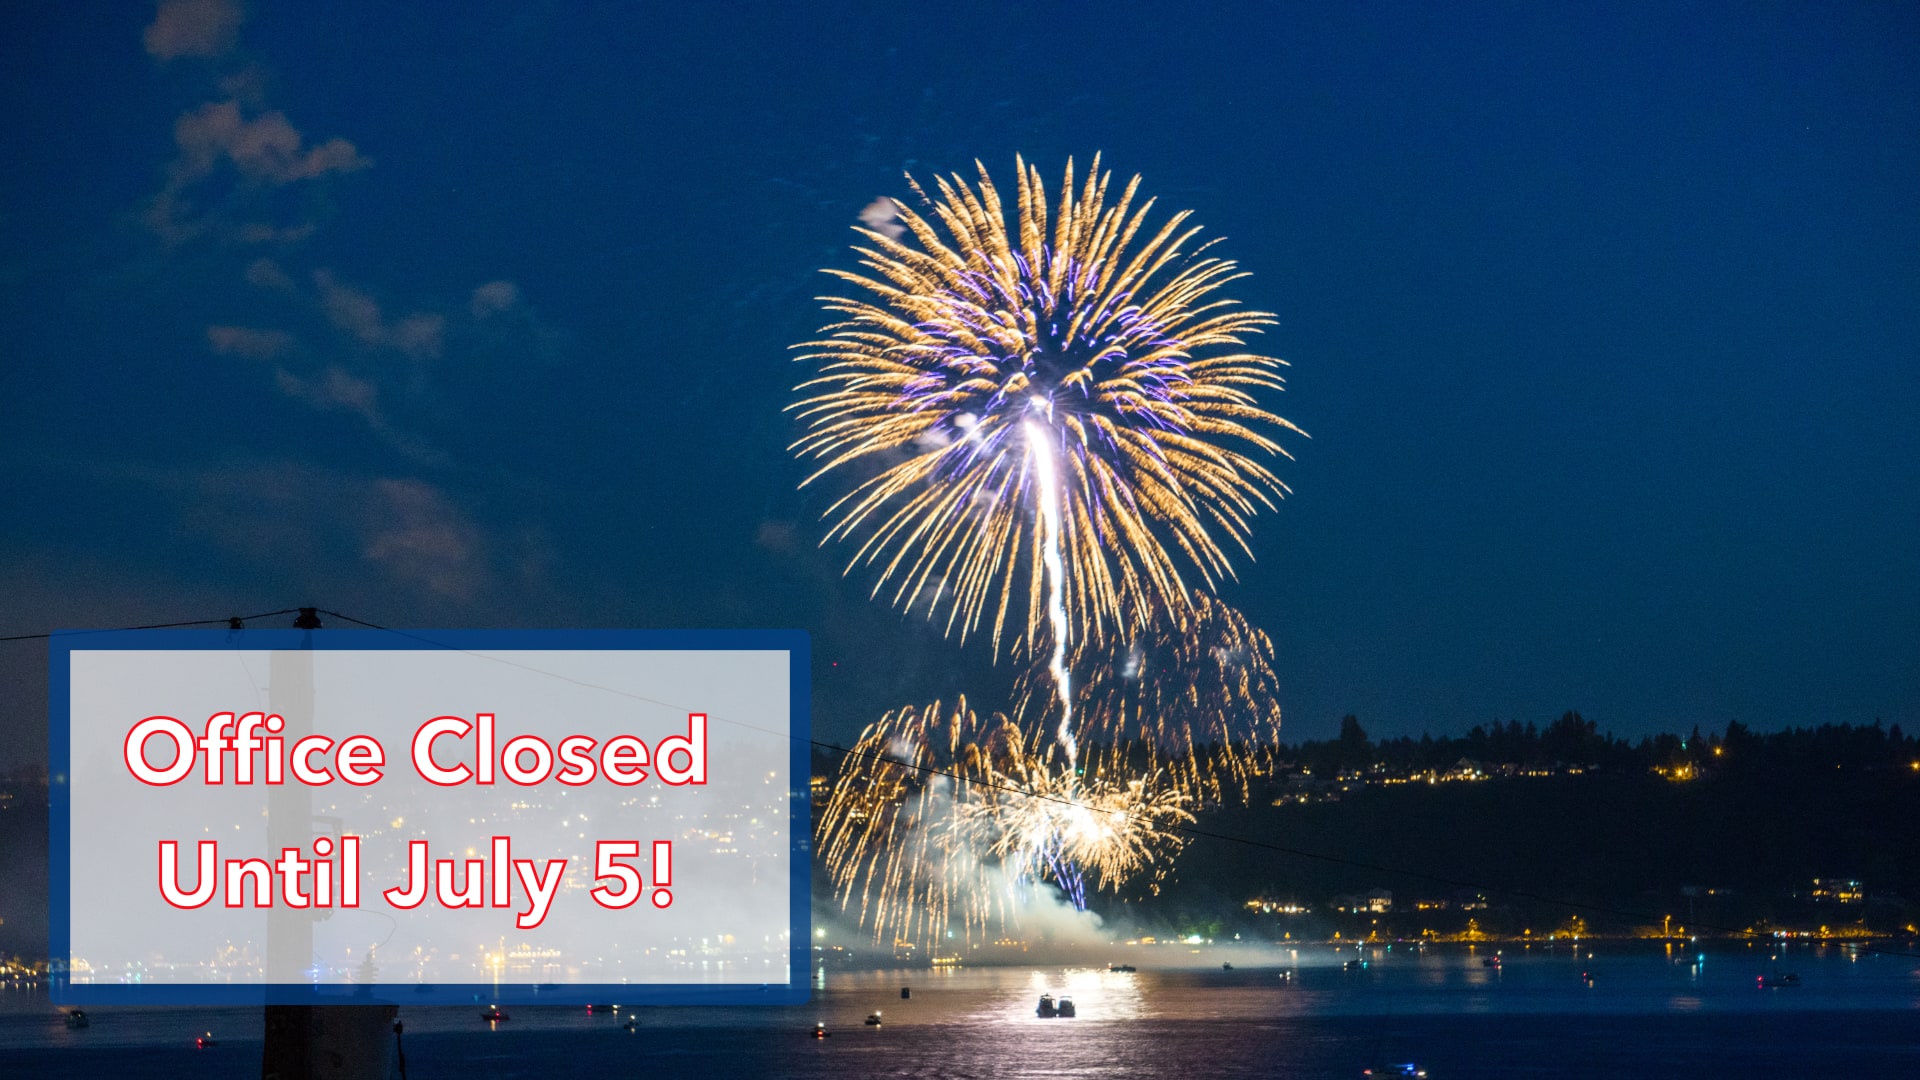 fireworks in the sky over water with "closed until July 5" text